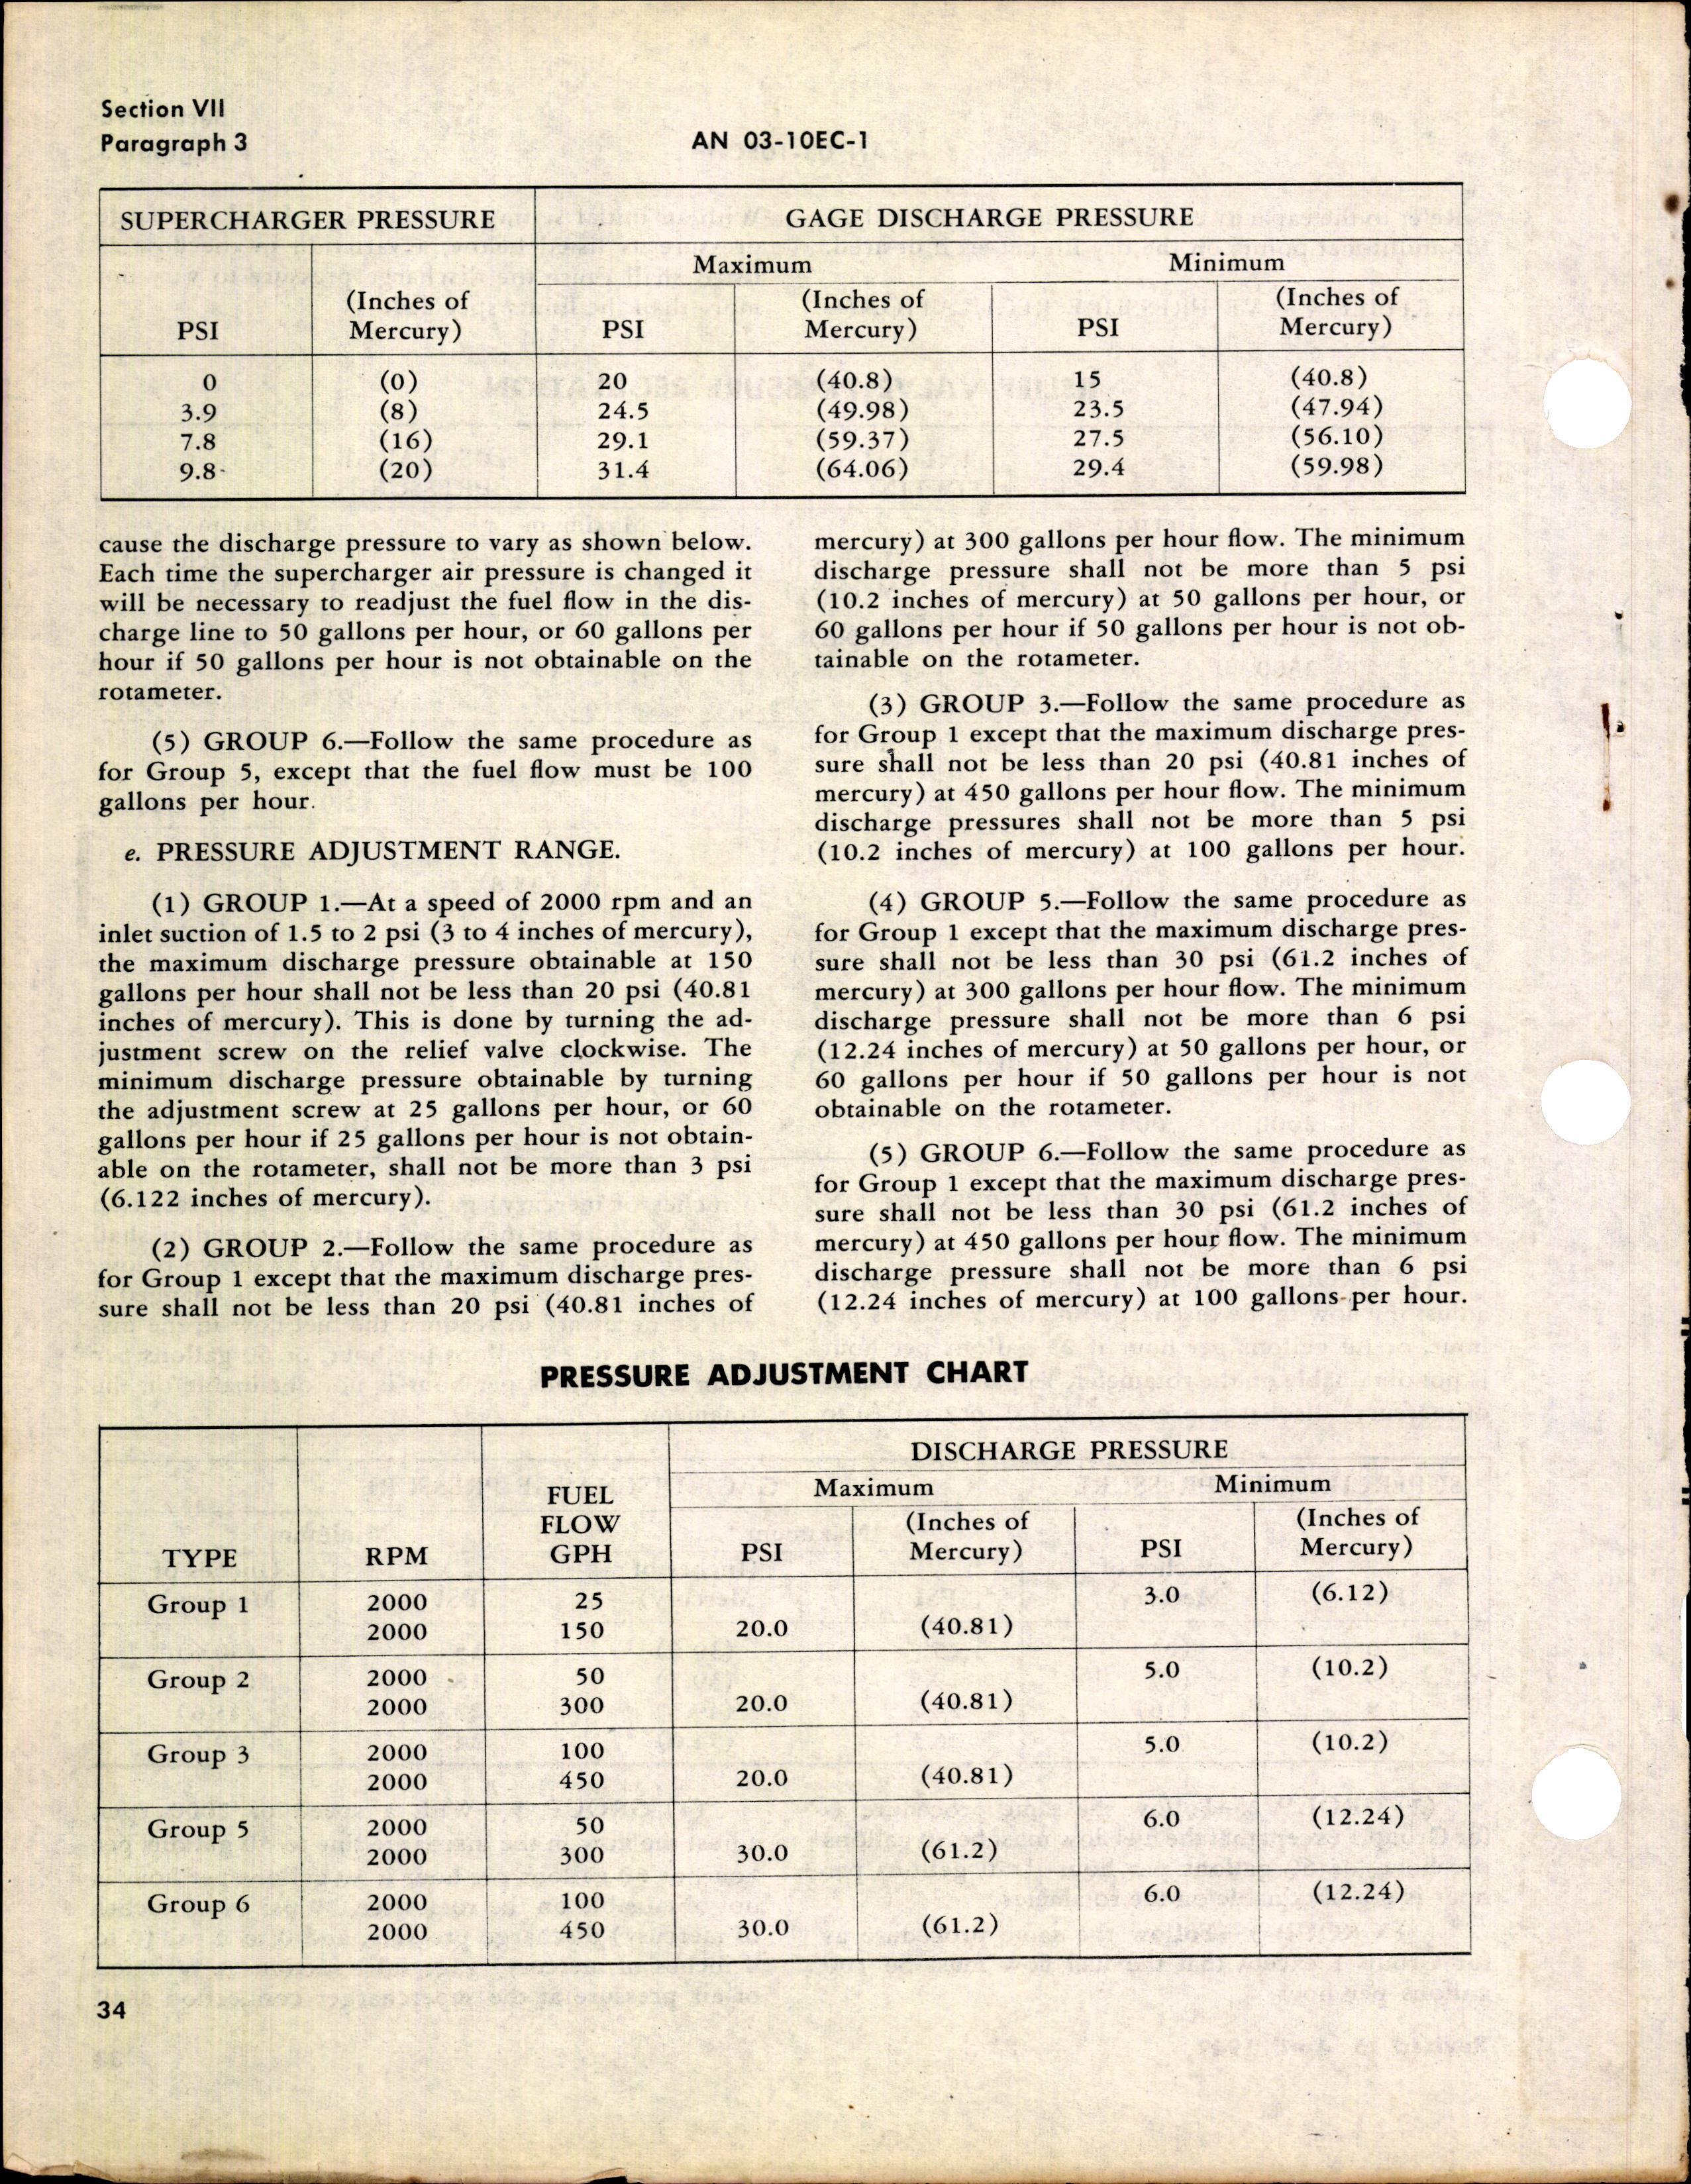 Sample page 4 from AirCorps Library document: Operation, Service, & Overhaul Instructions with Parts Catalog for Thompson Engine-Driven Fuel Pumps